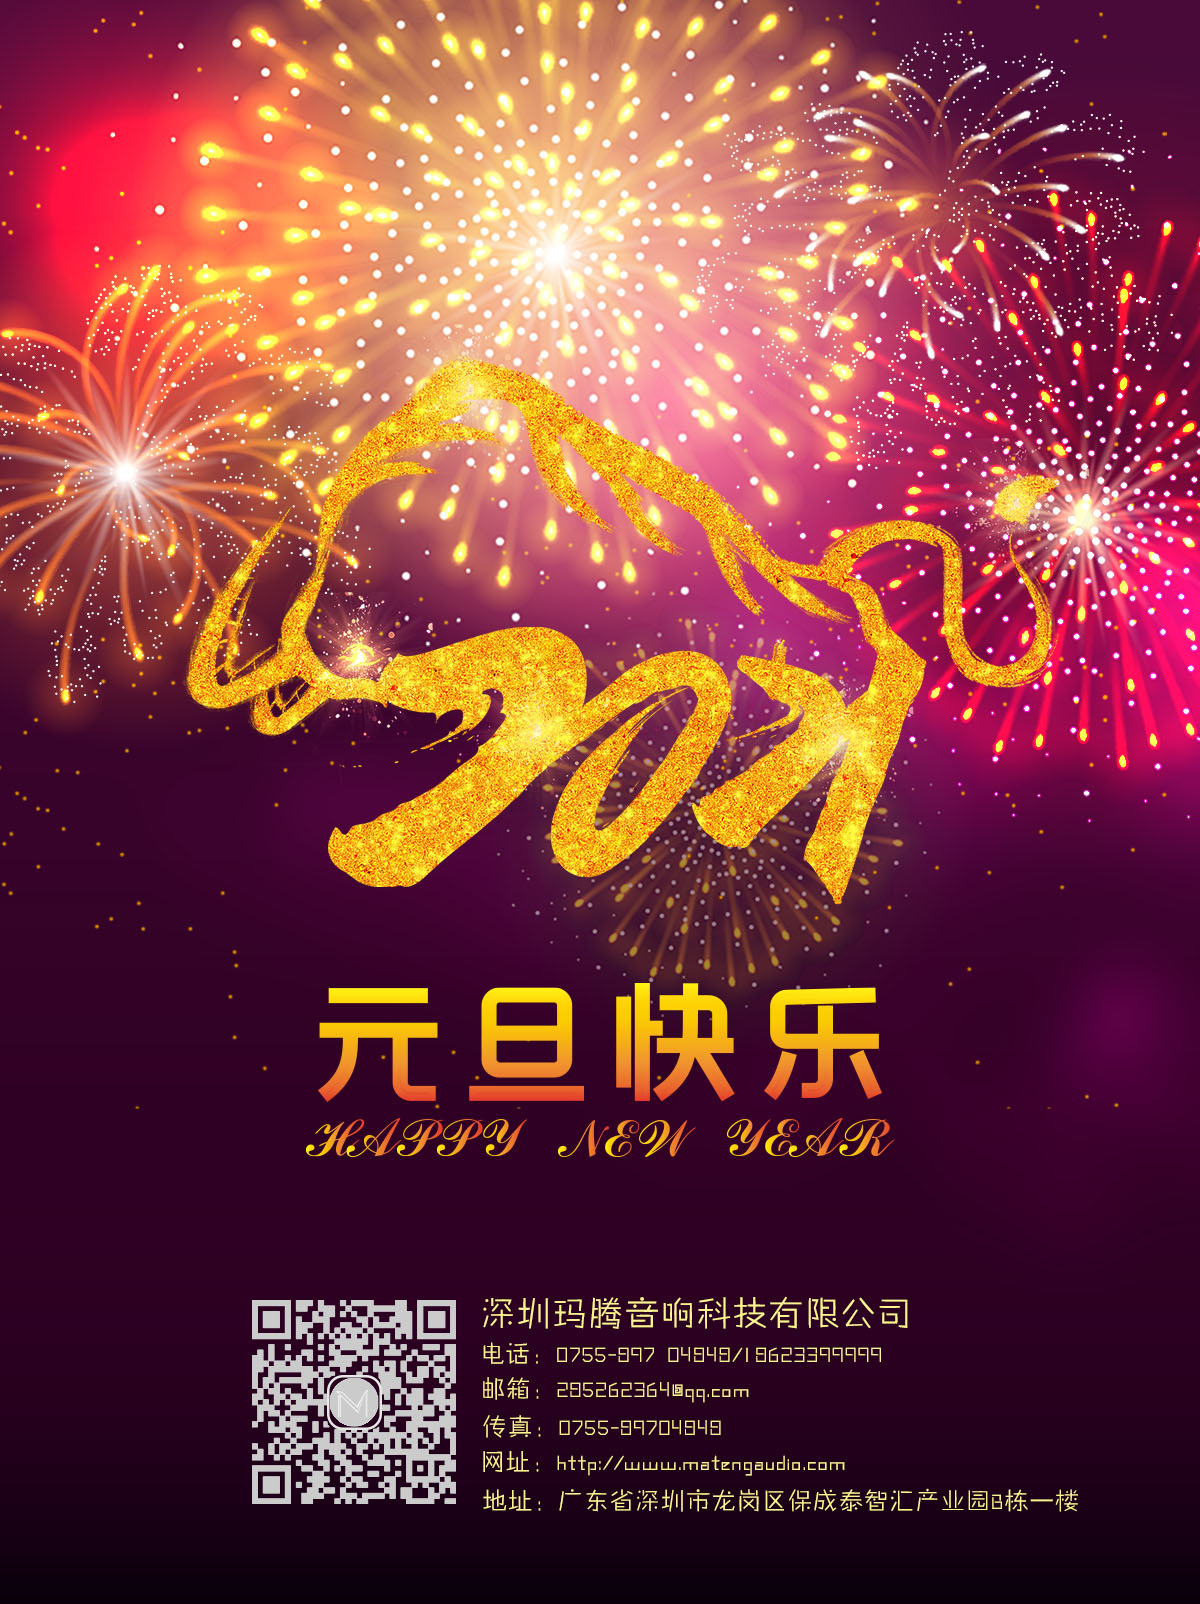 Happy New Years Day——Happy New Years Day(图1)